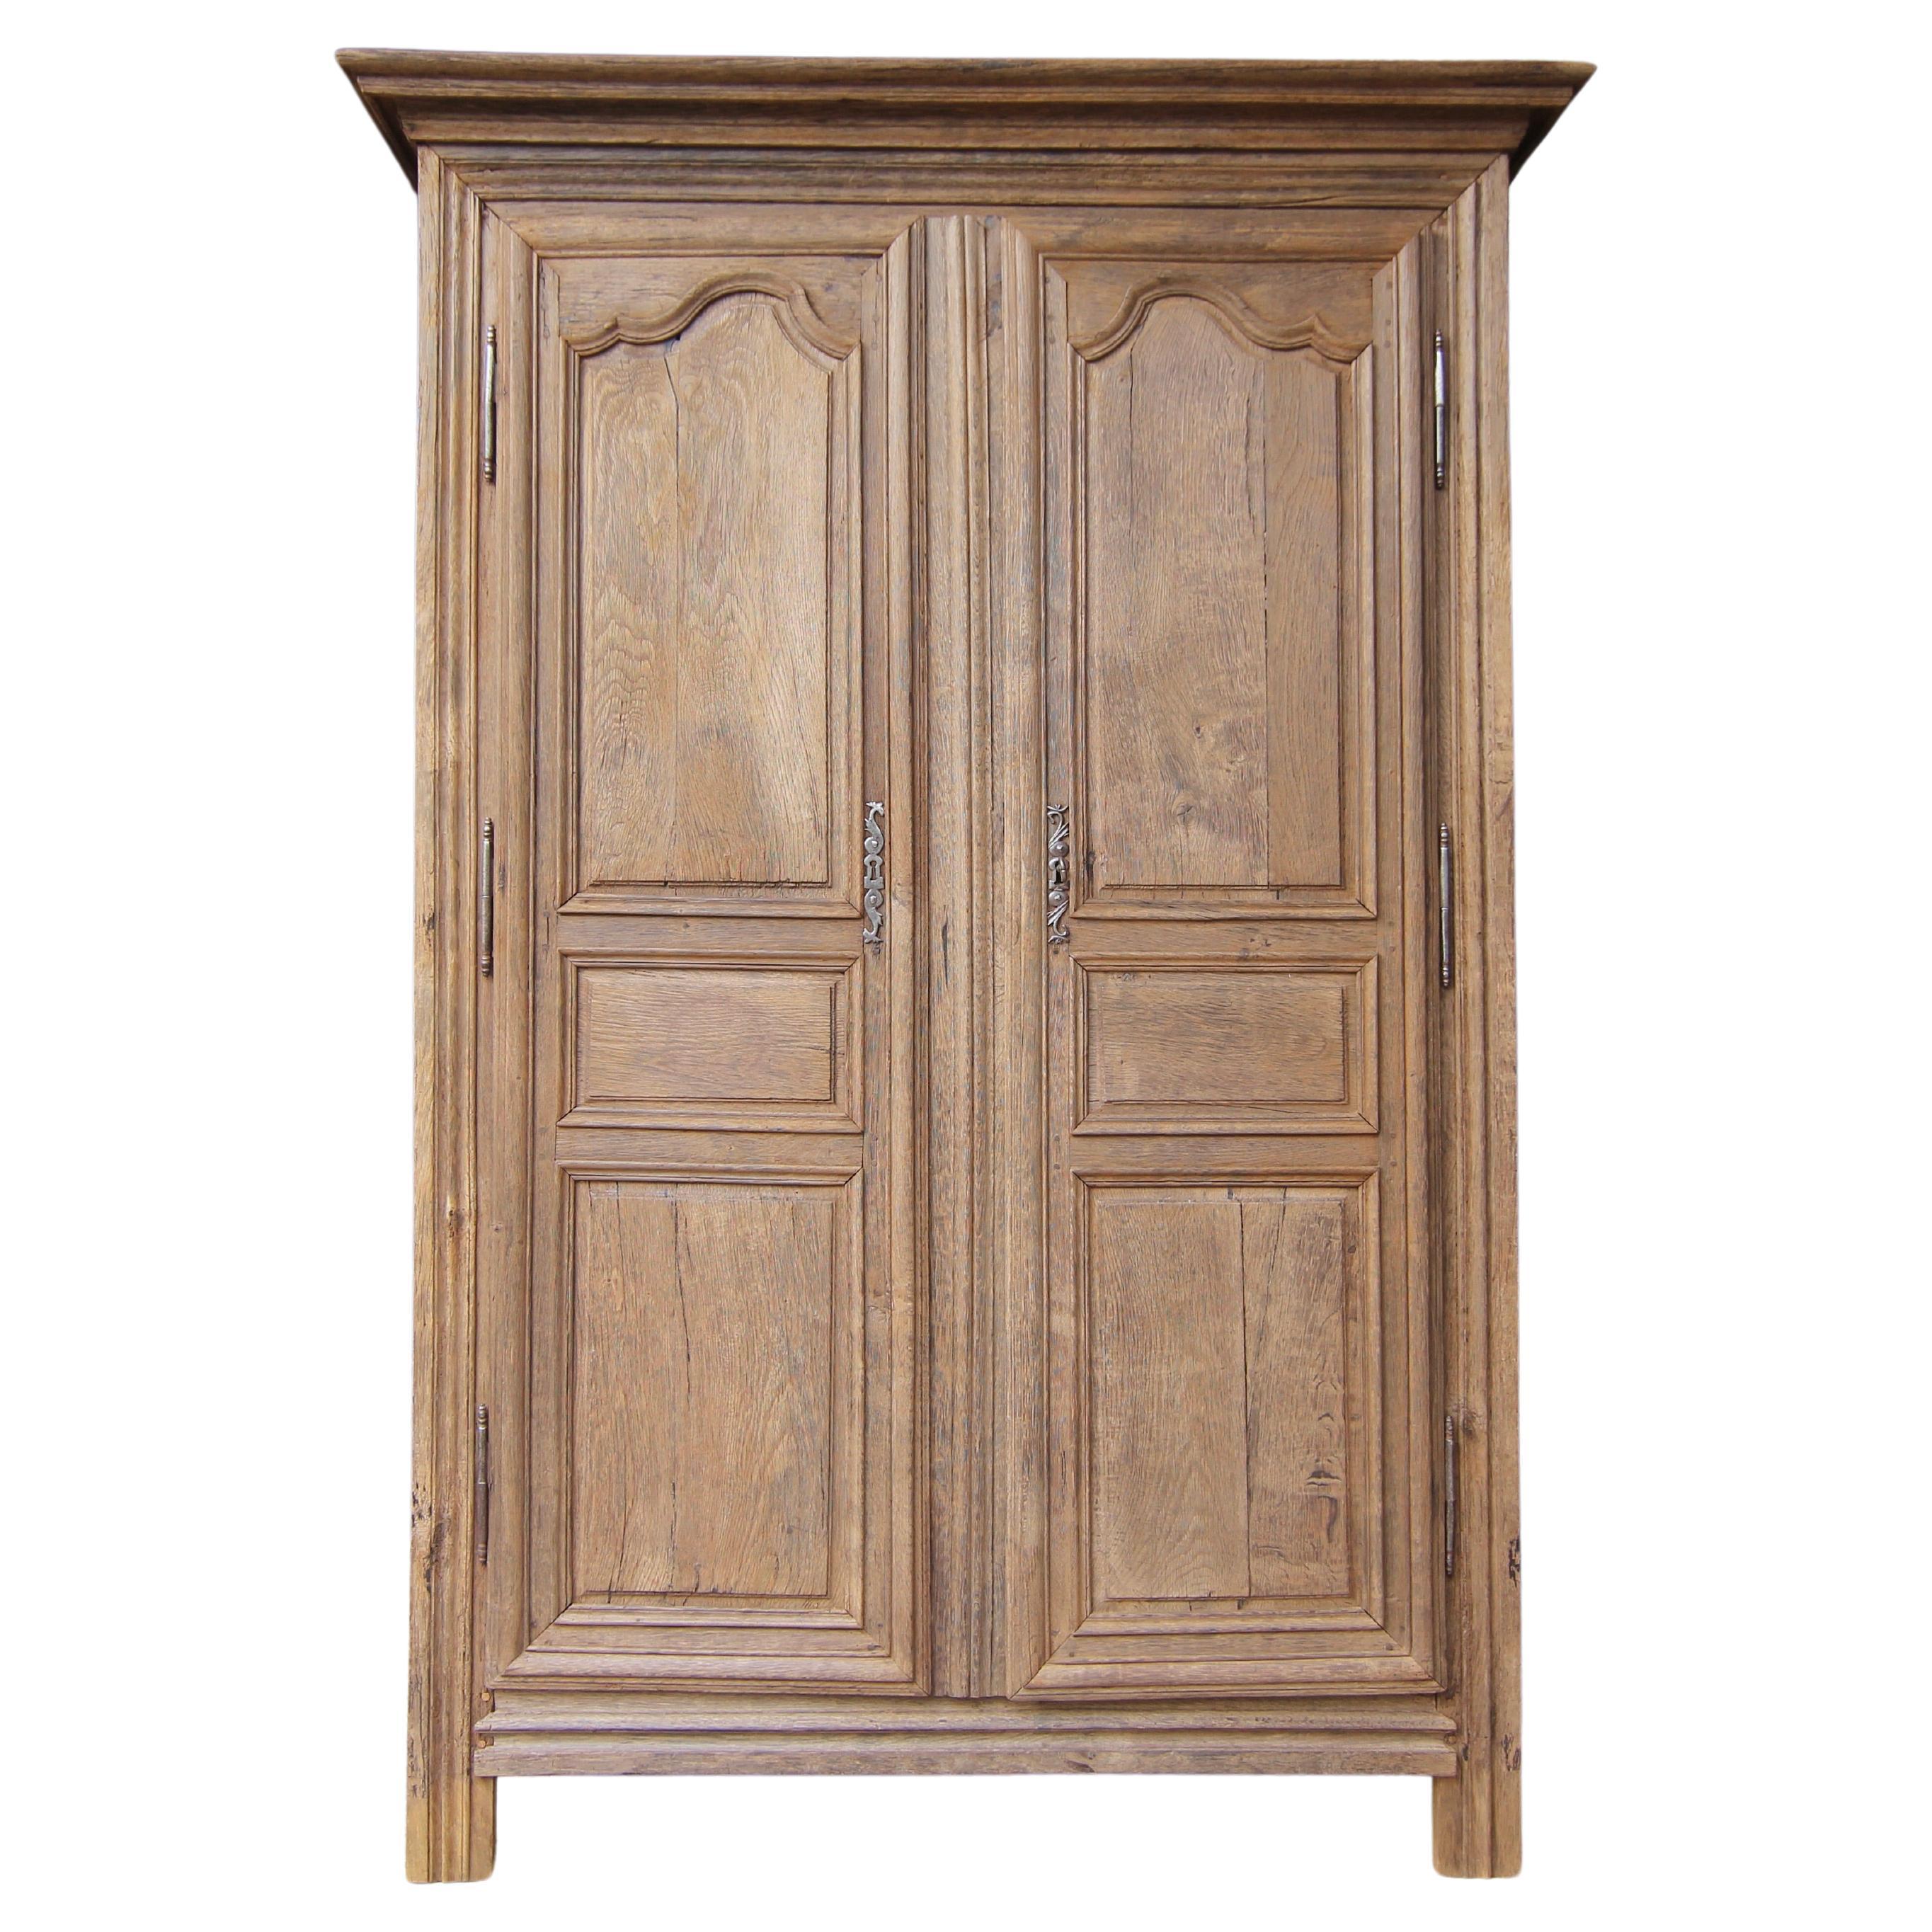 Early 19th Century French Provincial Rustic Oak Cabinet For Sale